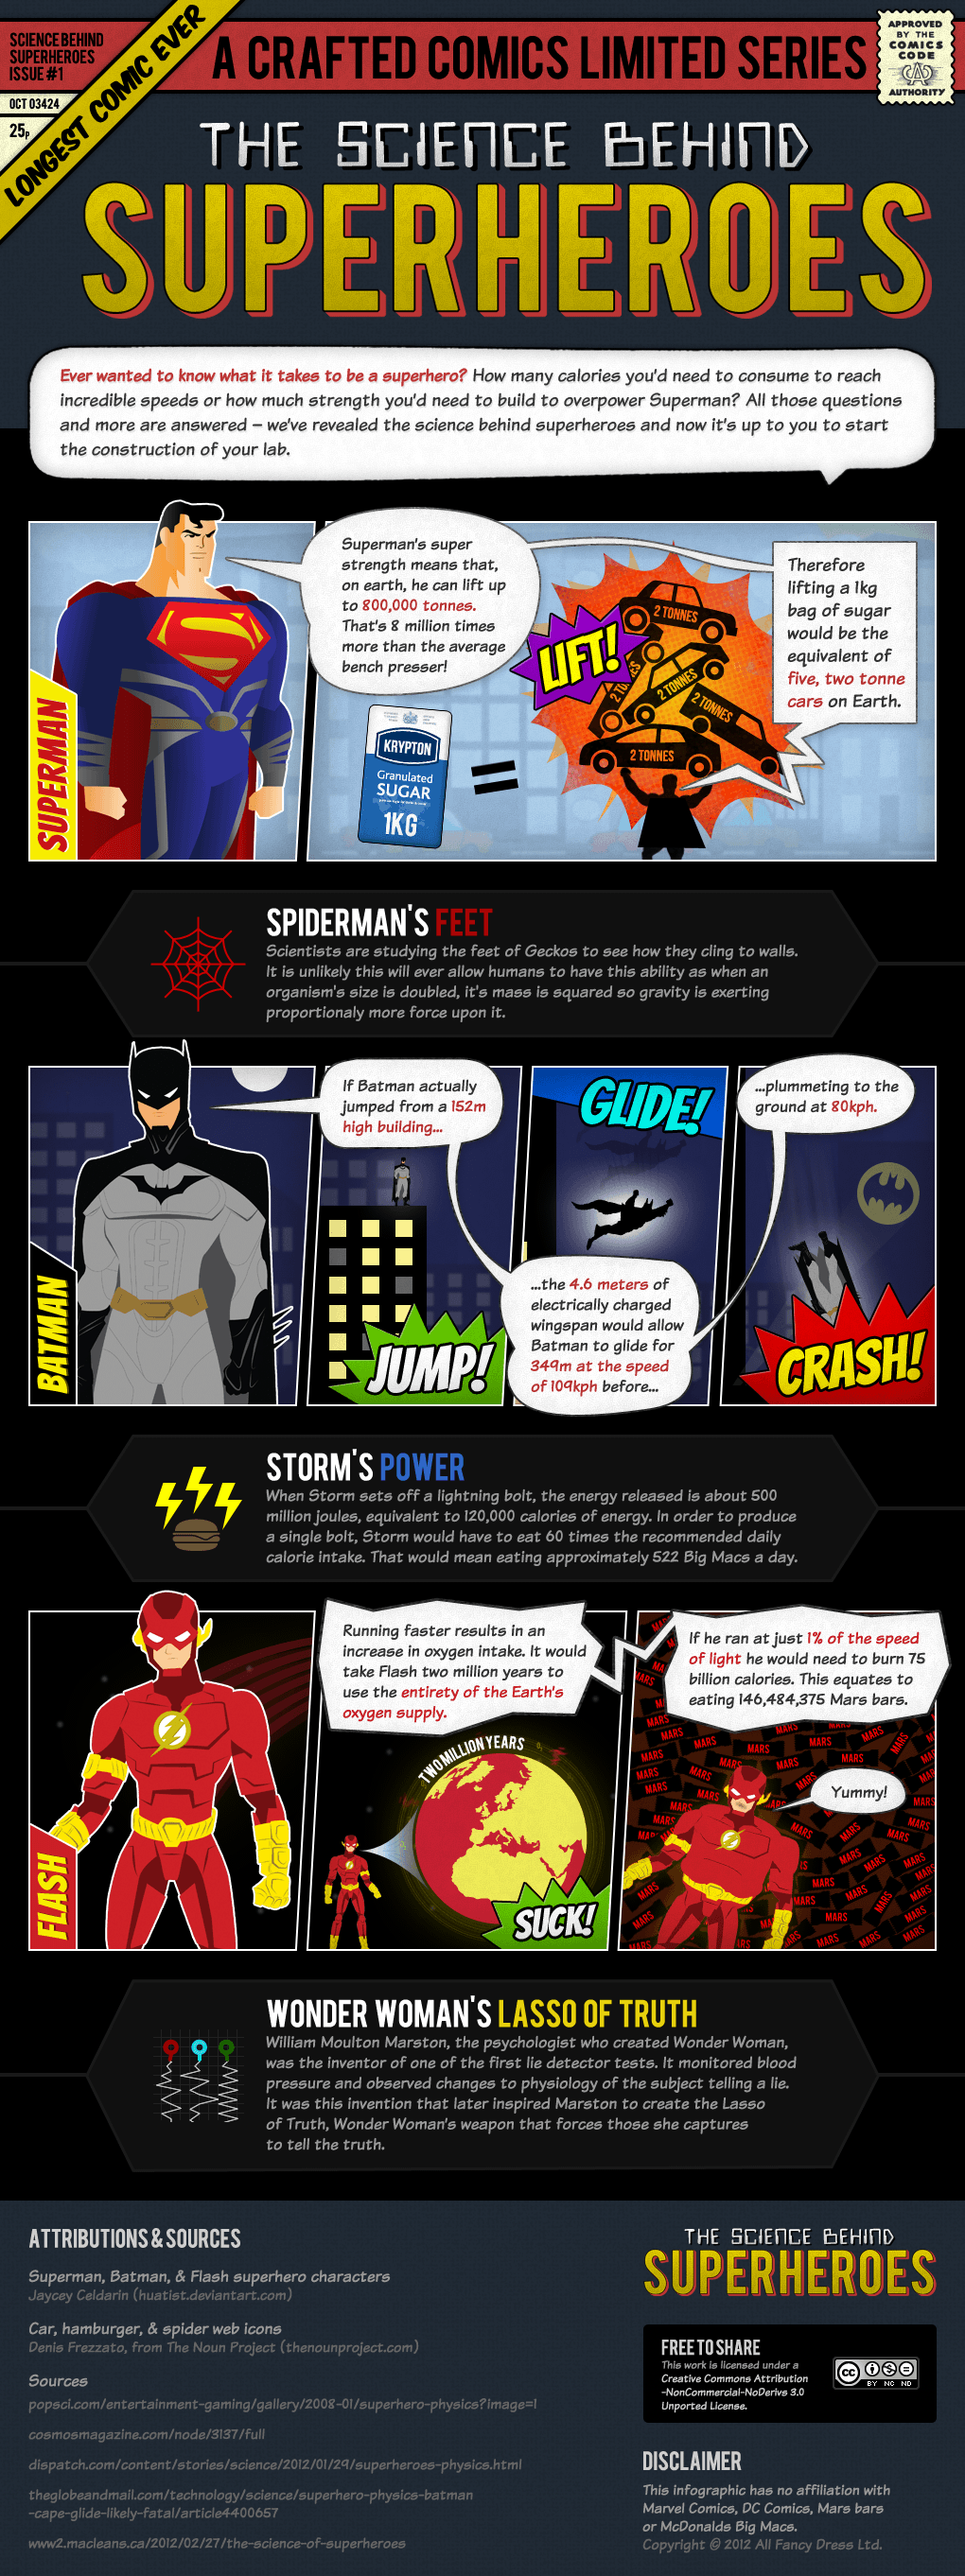 The Science Behind the Superheroes